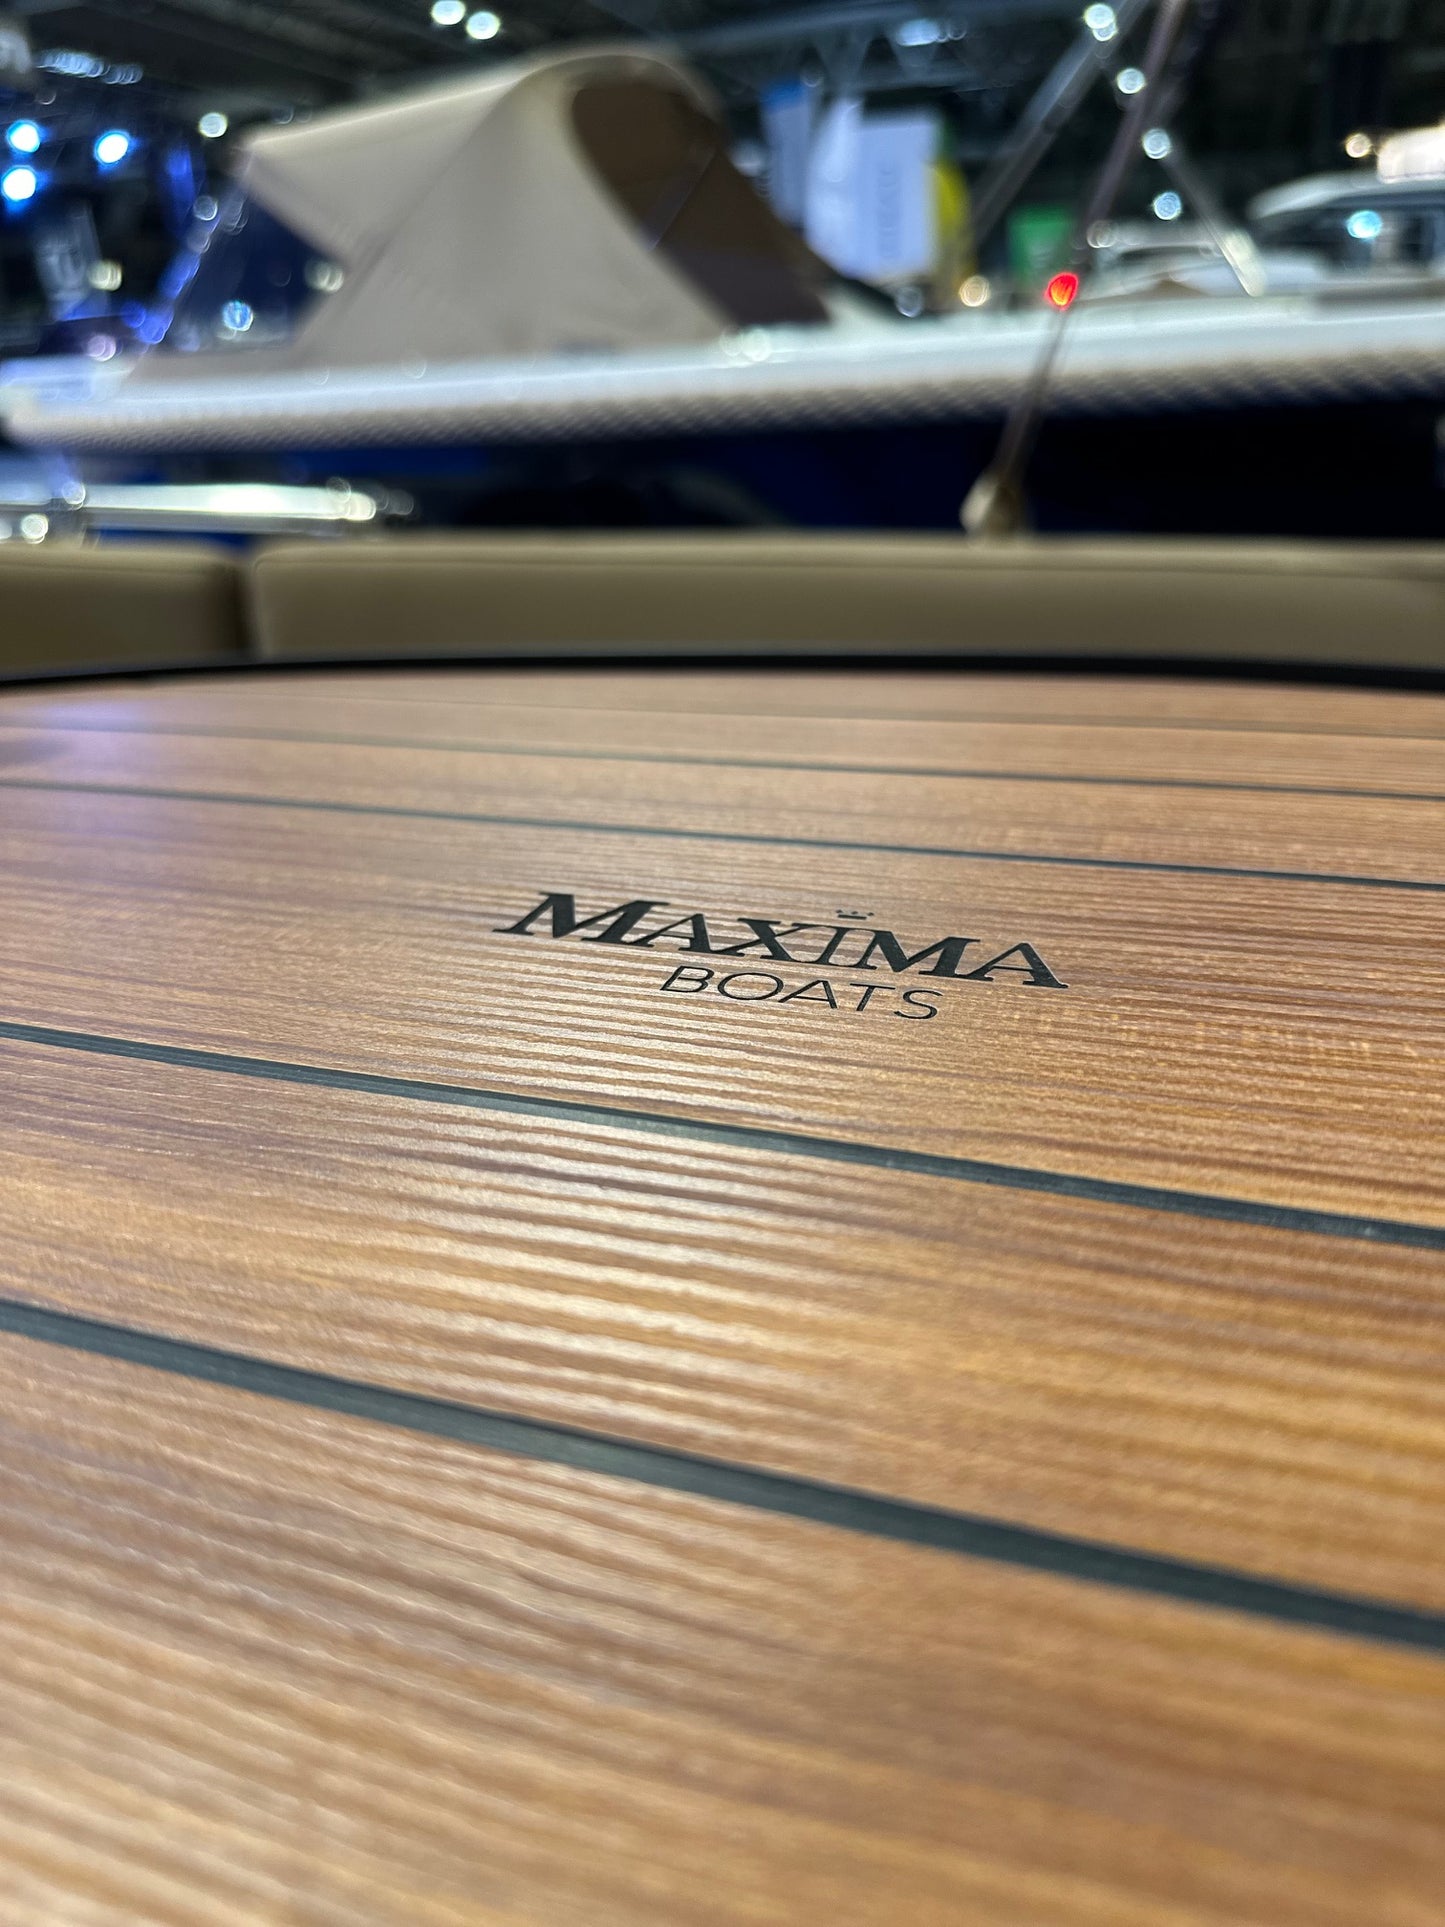 Maxima 550 Boat powered by Honda BF50 50hp In Stock Now